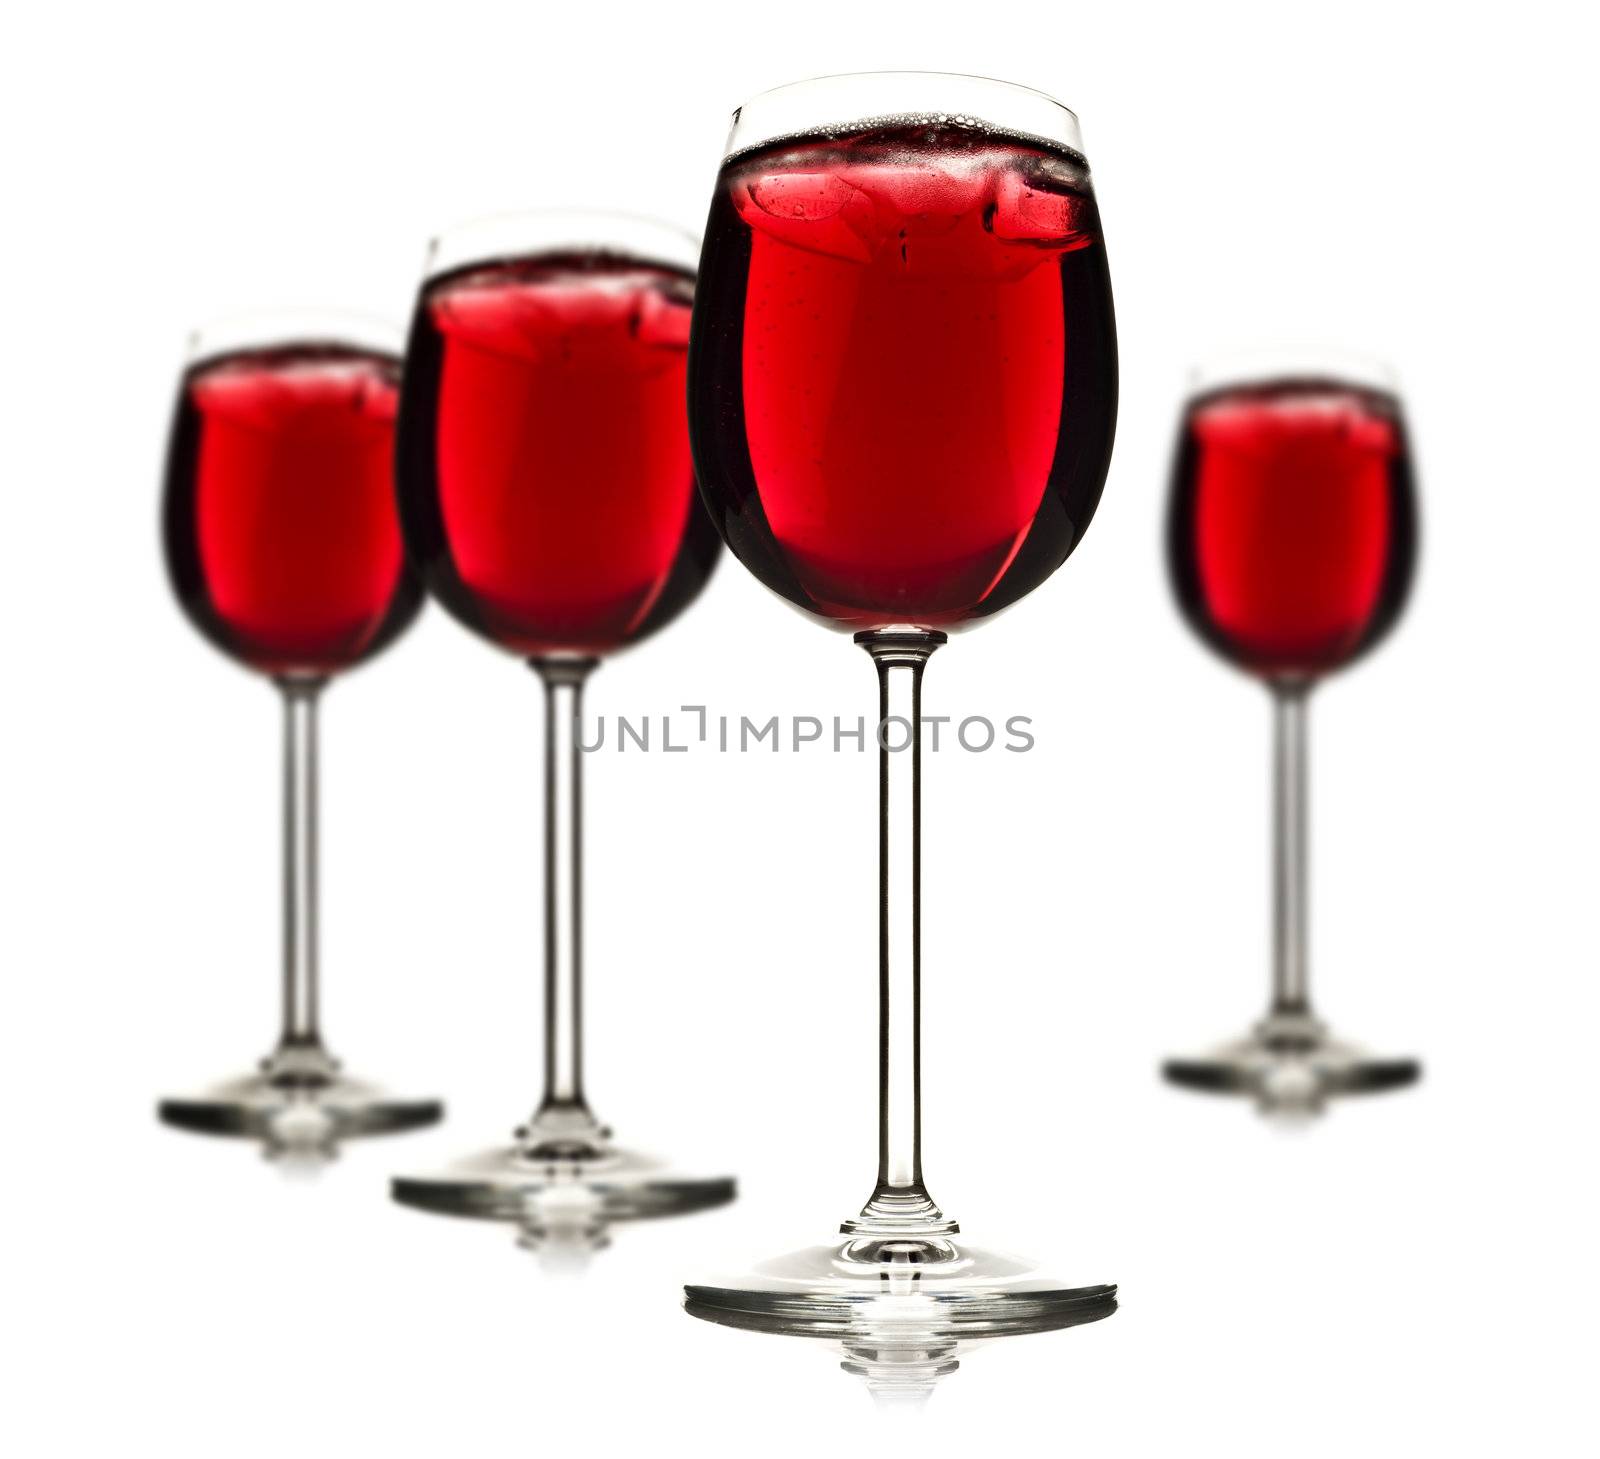 Four wine glasses with red fruit juice and ice by tish1